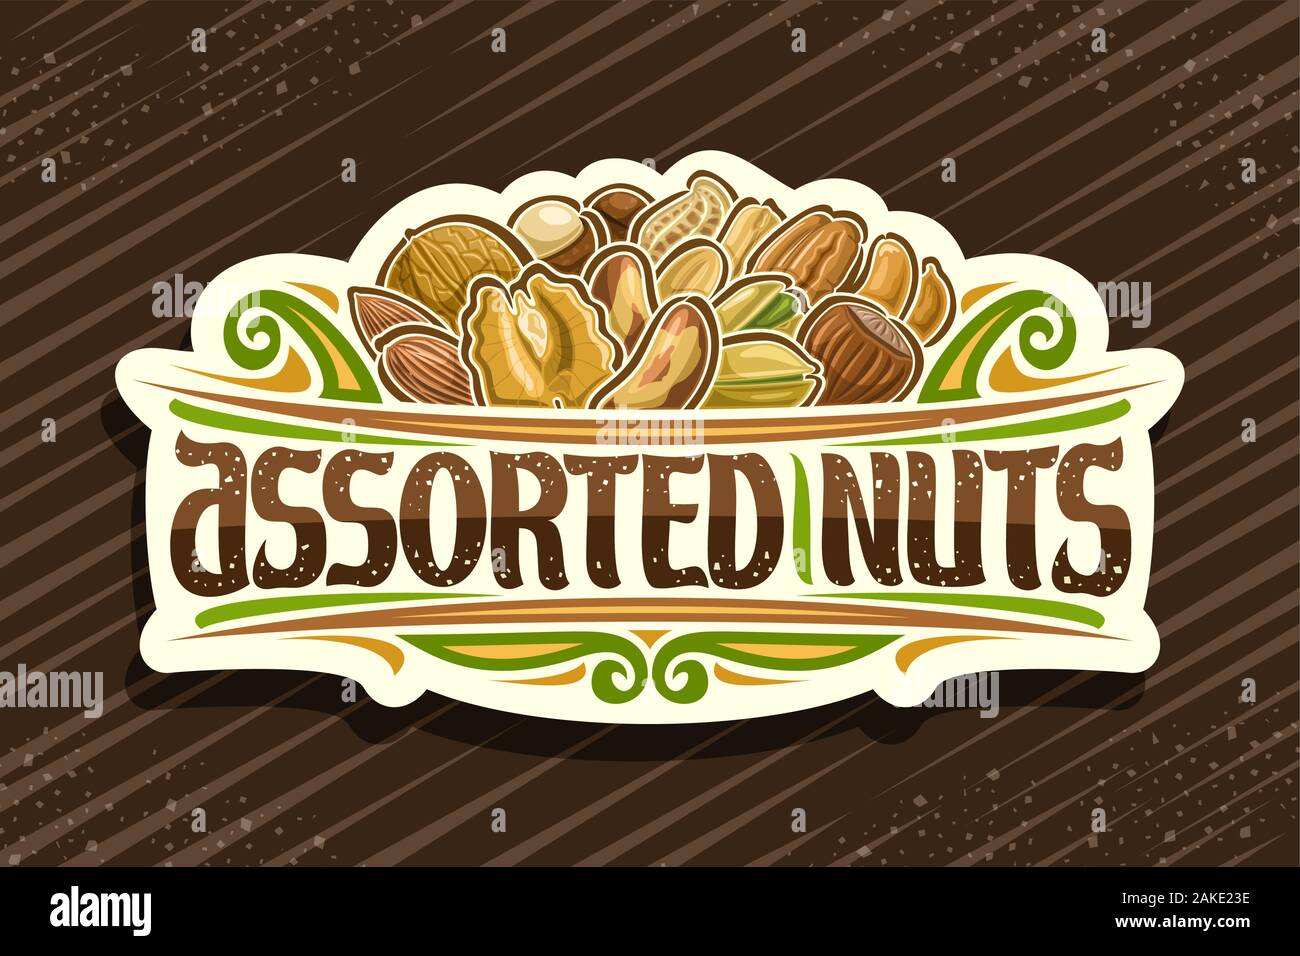 Vector logo for Assorted Nuts, decorative cut paper sign with illustration of pile raw different nuts and flourishes, design signage with original typ Stock Vector